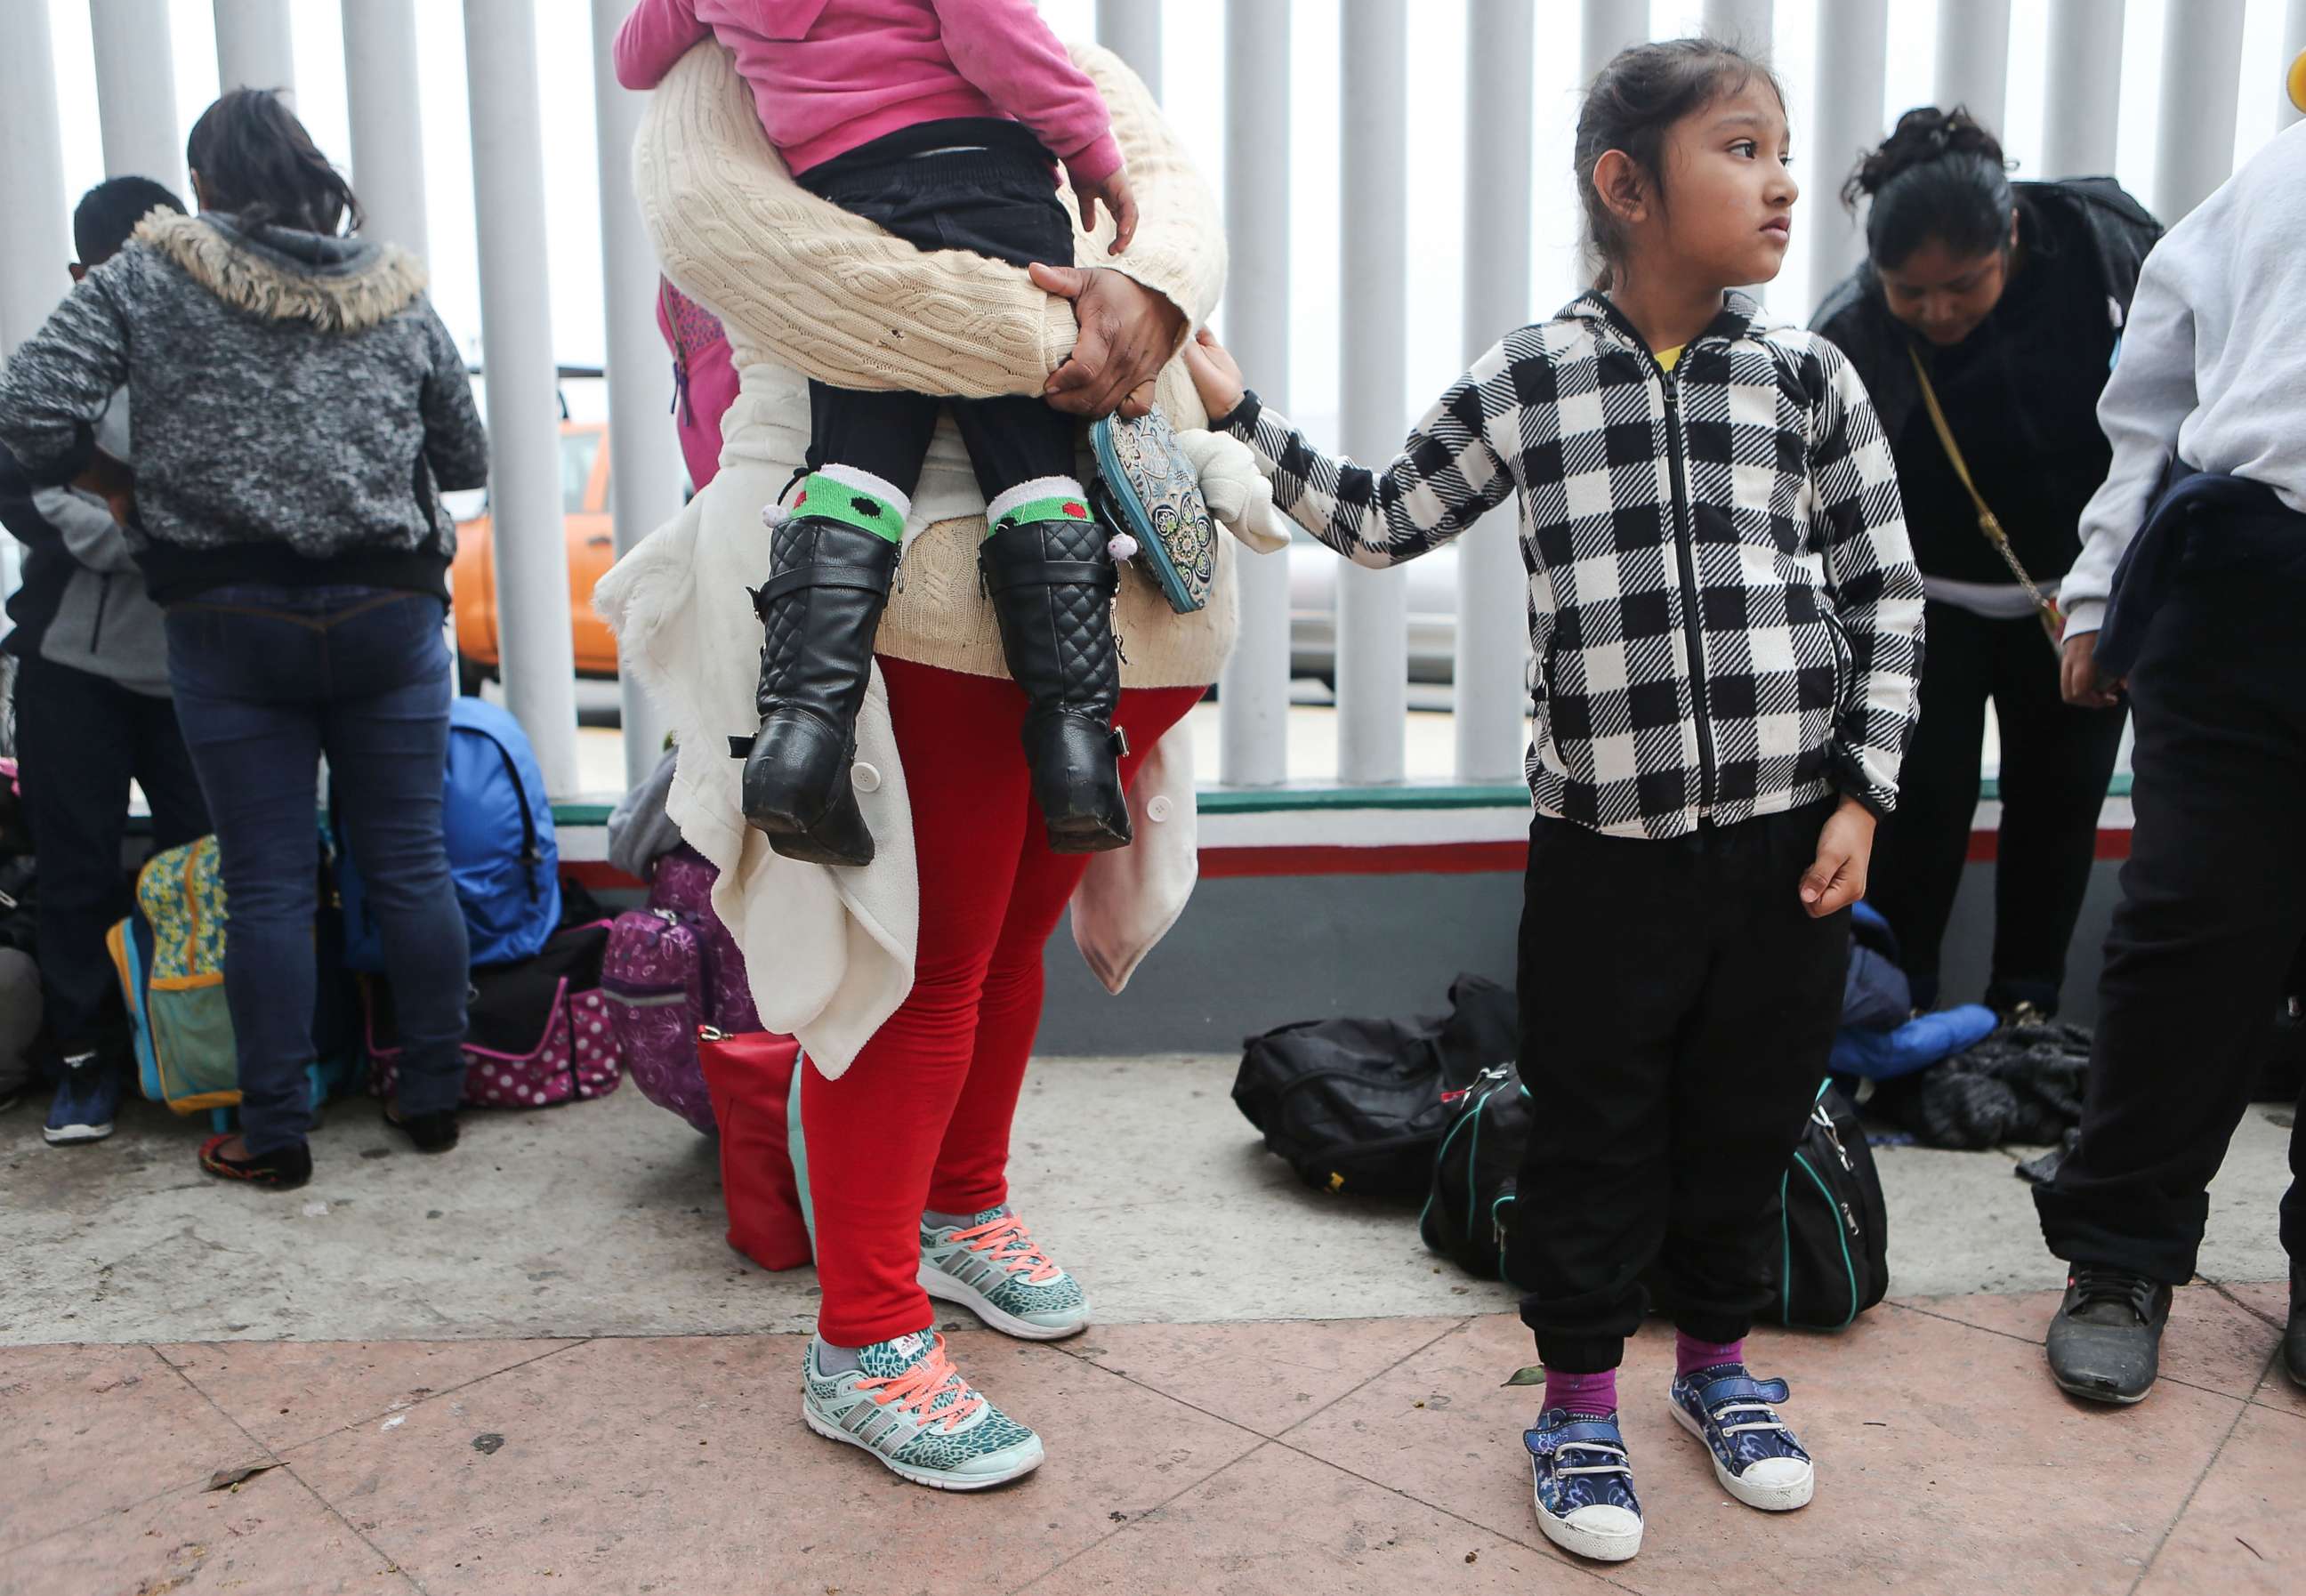 PHOTO: A migrant mother waits with her two daughters on their way to the port of entry to ask for asylum in the U.S., June 21, 2018, in Tijuana, Mexico.